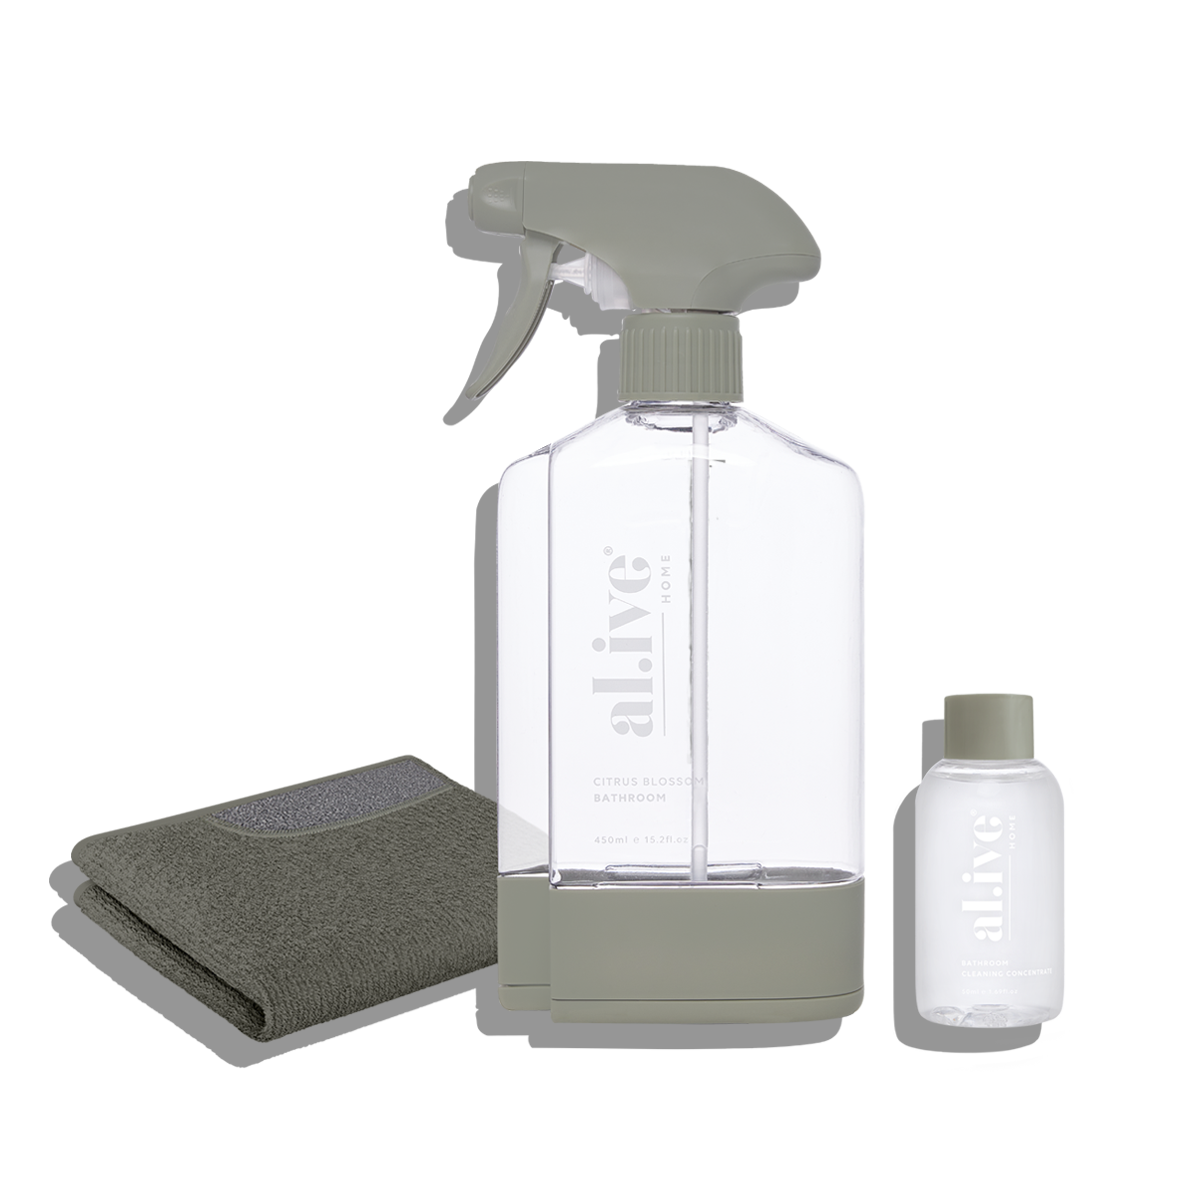 ALIVE BODY BATHROOM CLEANING KIT